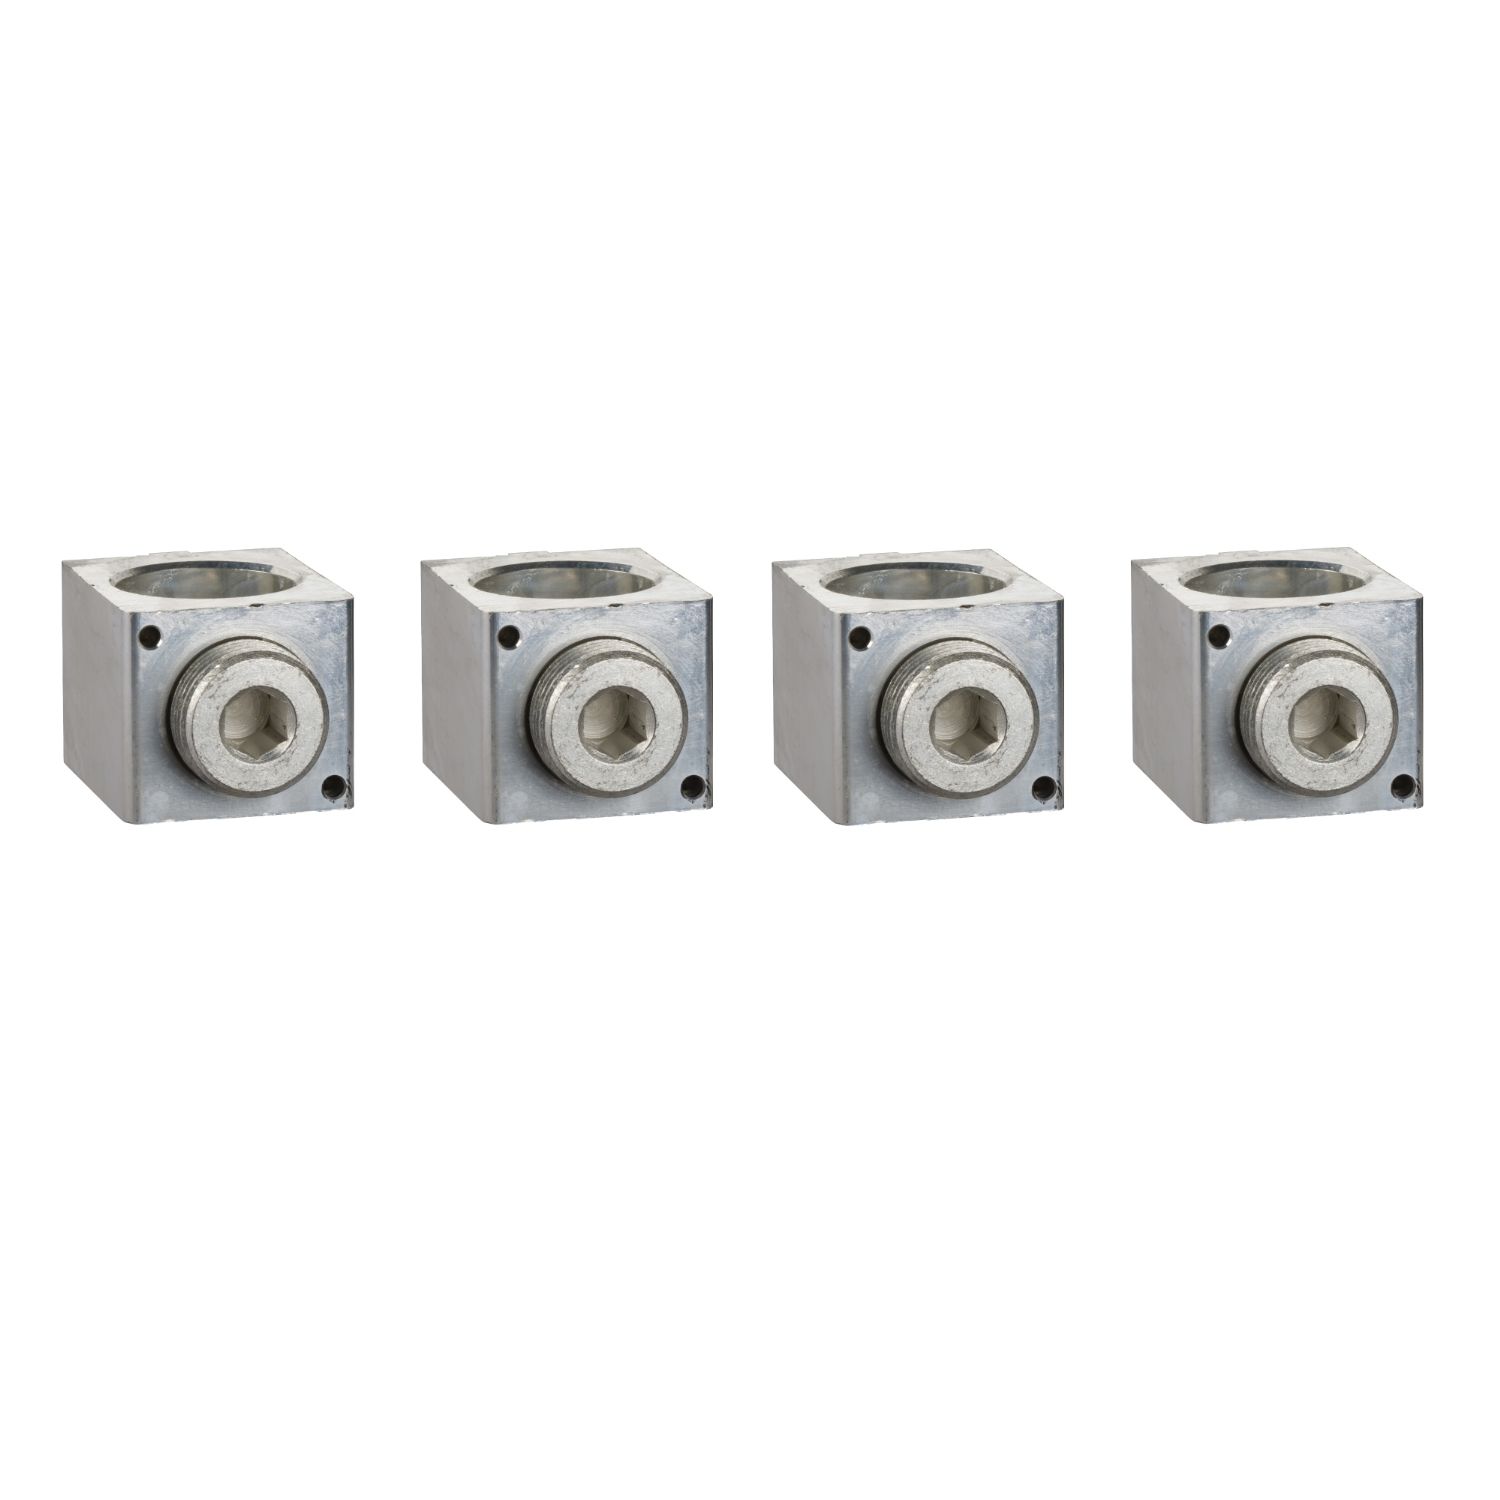 LV432480 Aluminium bare cable connectors, ComPacT NSX, for 1 cable 35mm² to 300mm², 630A, set of 4 parts